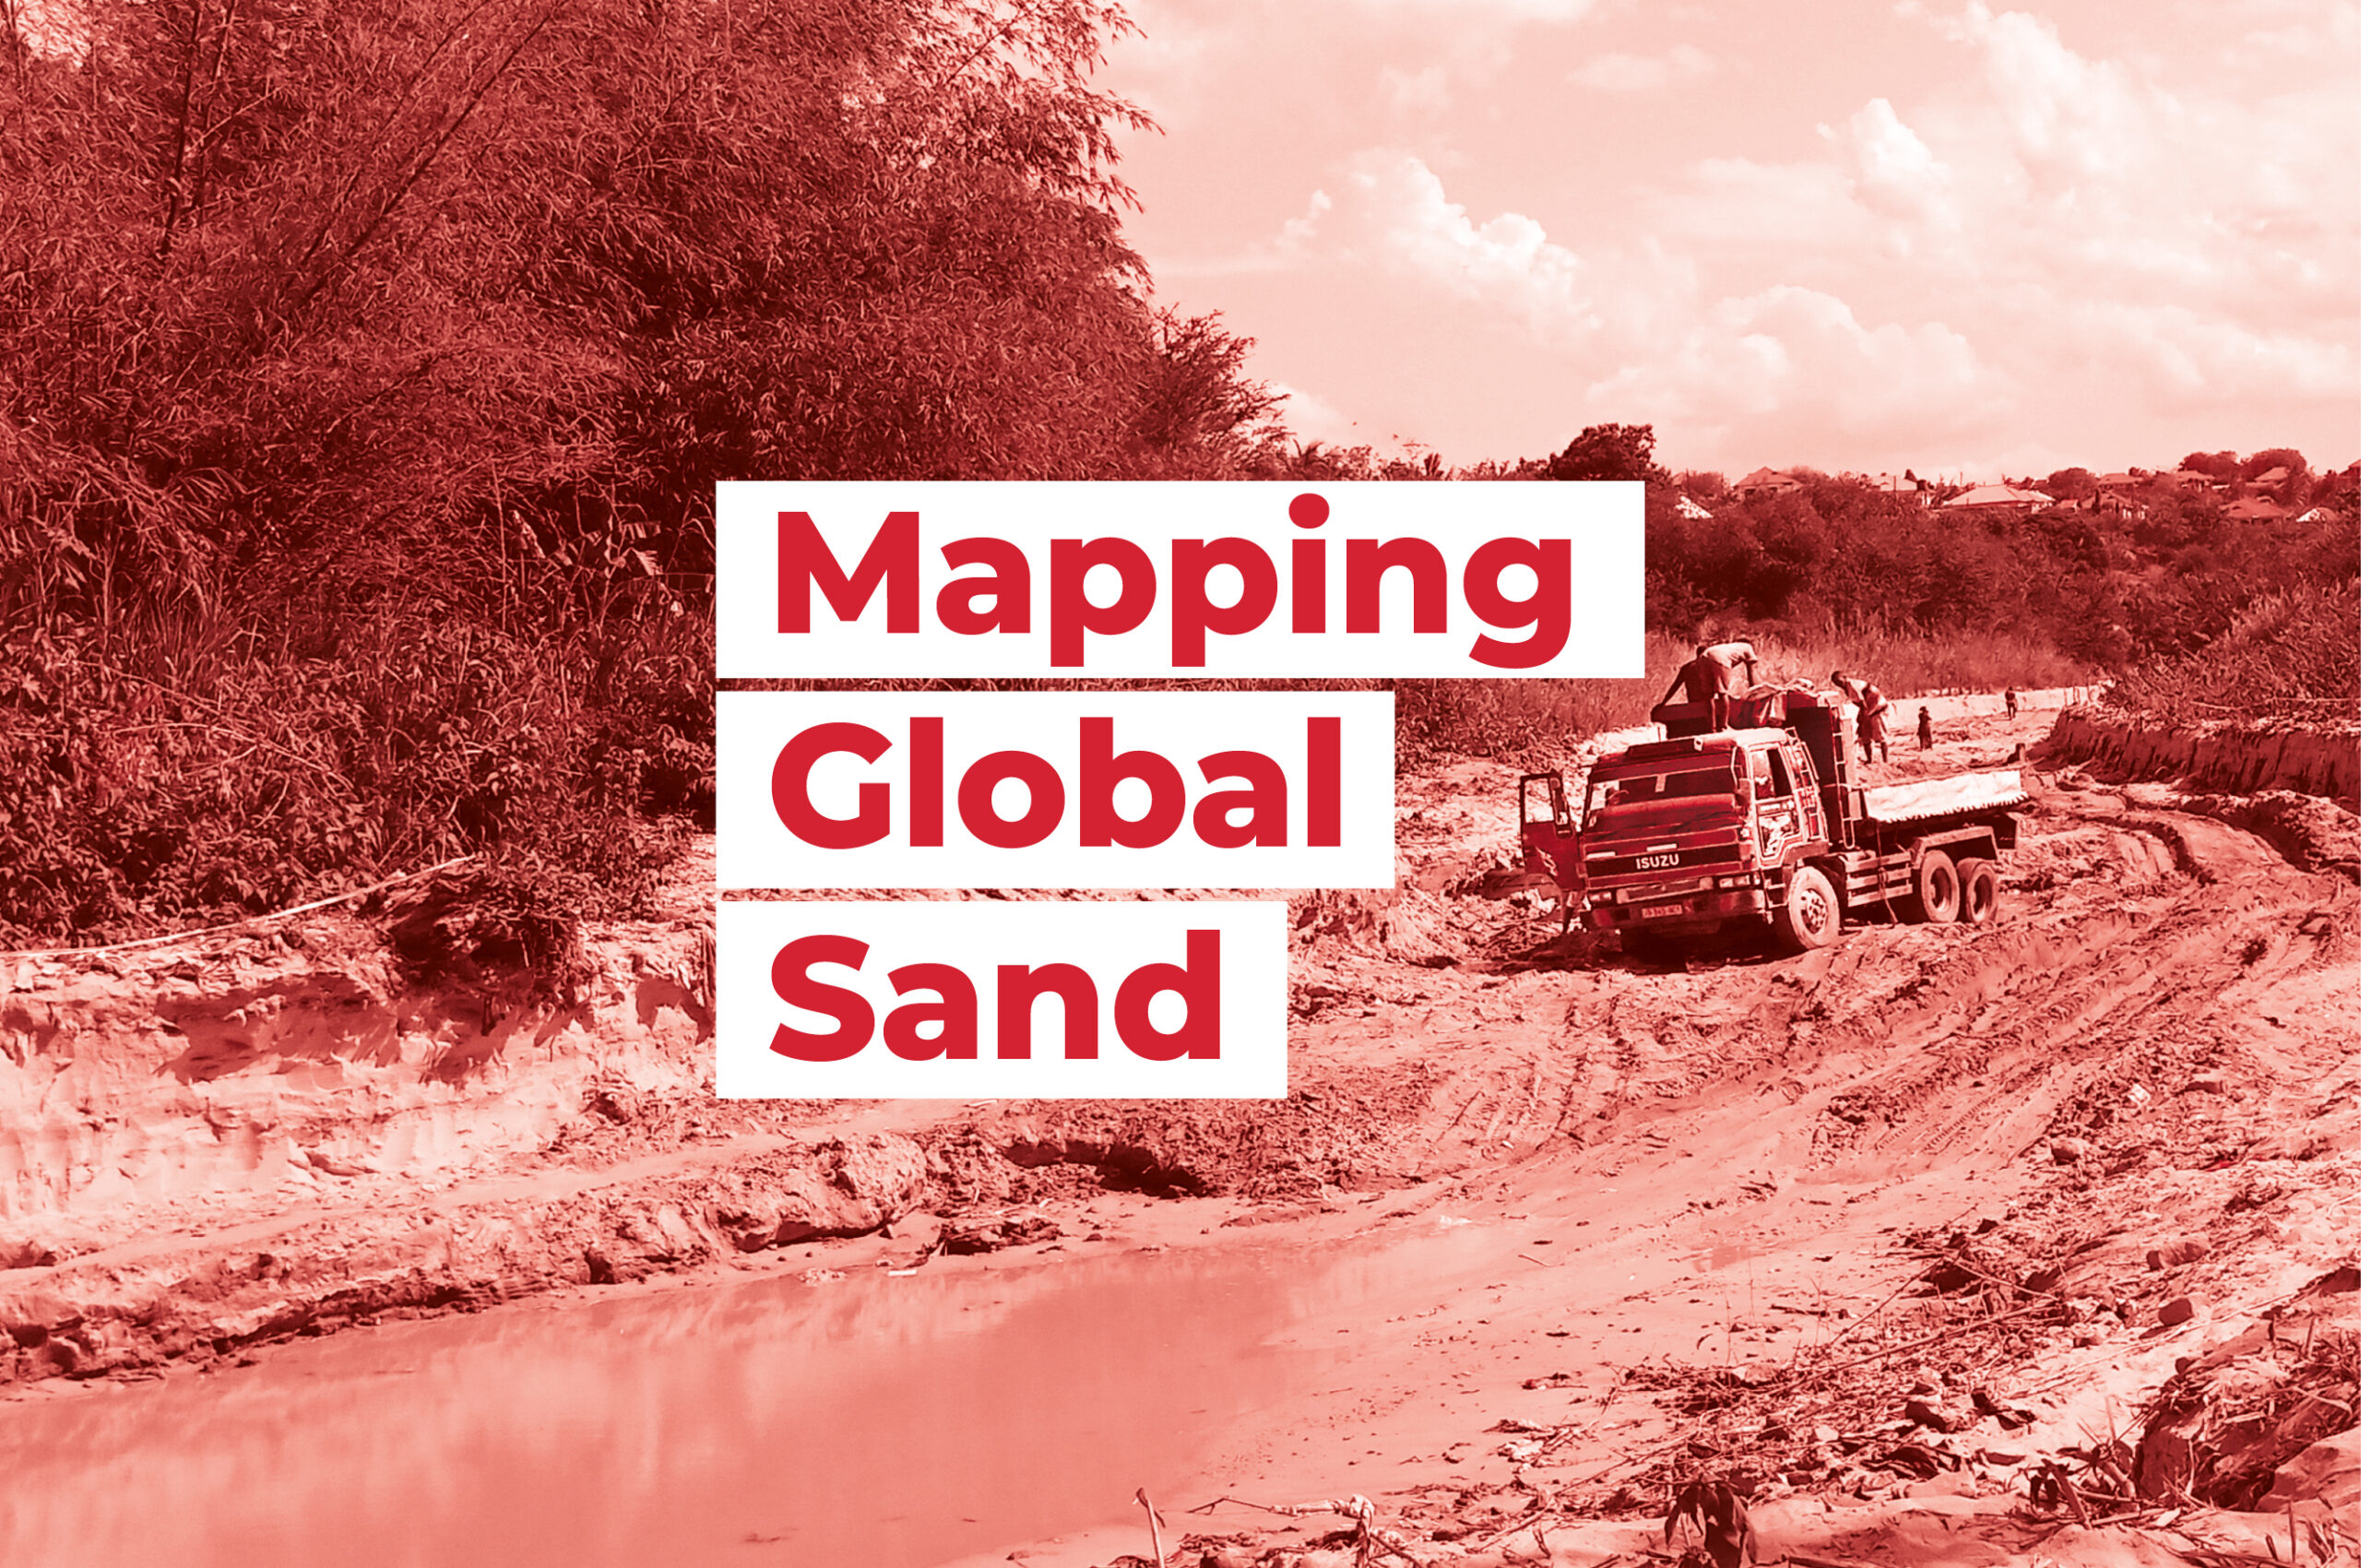 02_Mapping Global Sand_2